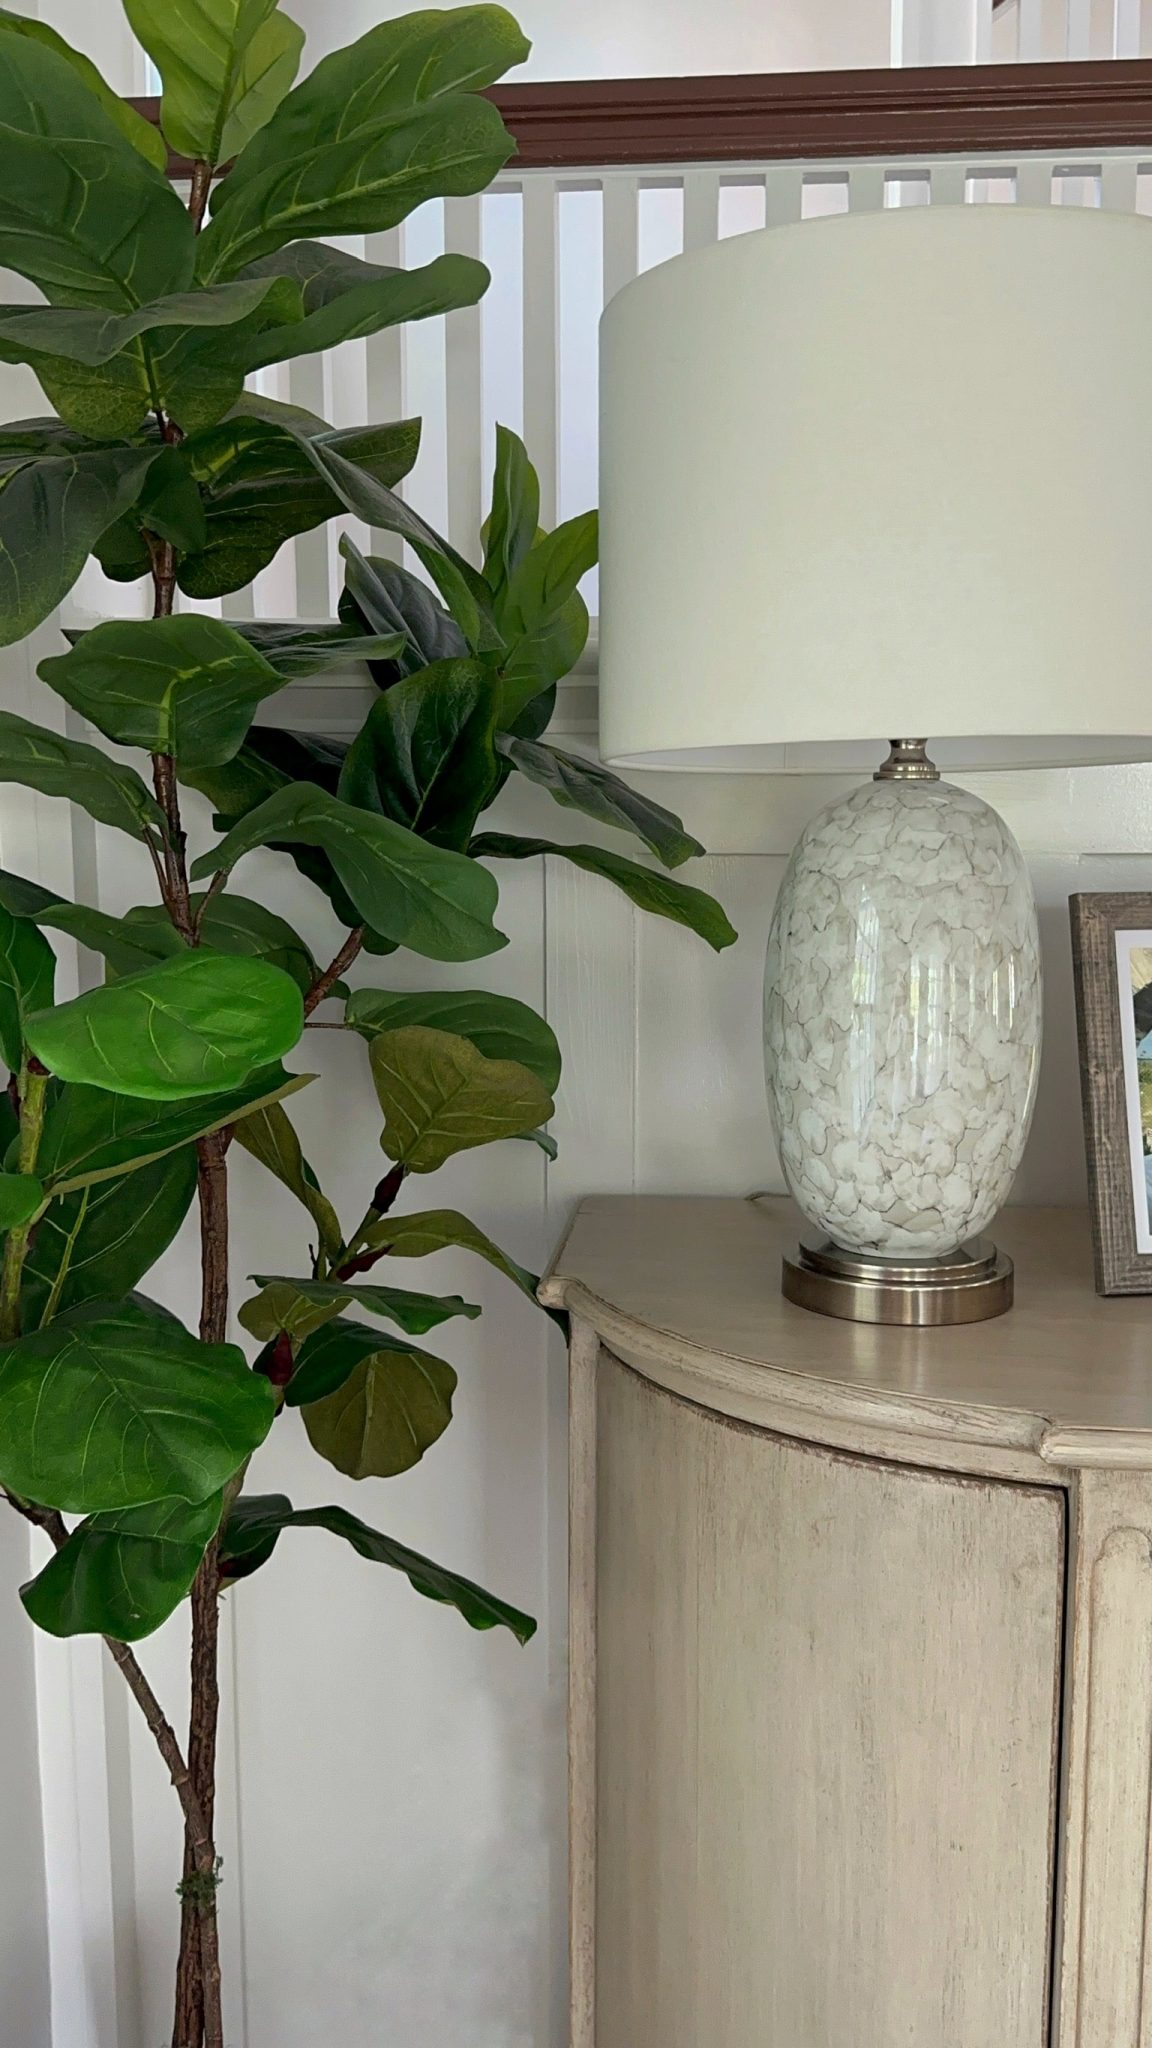 A white dresser with a large plant in front of it beautifully enhances the interior design.